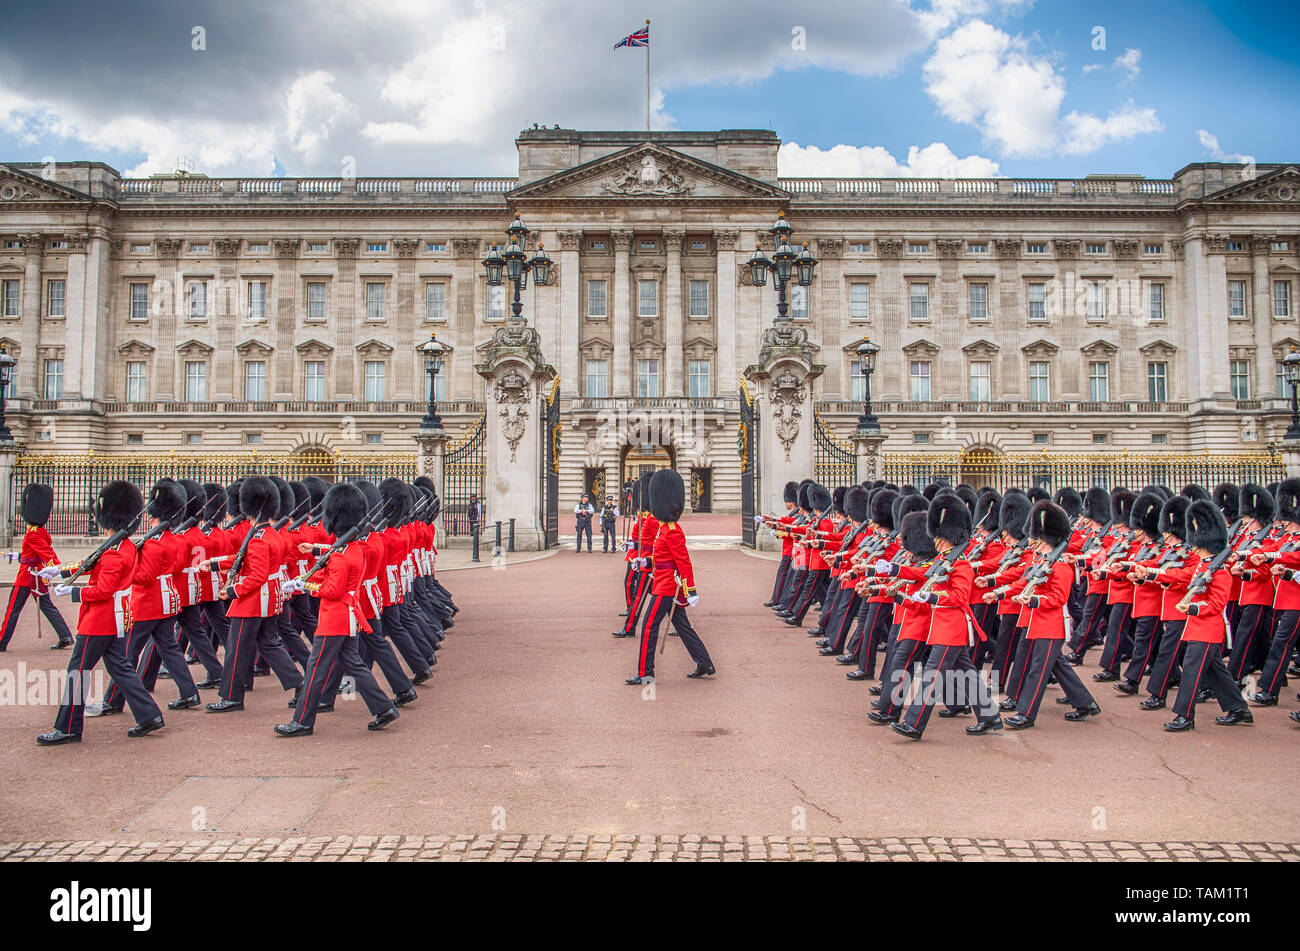 London, UK. 25th May 2019. Guardsmen march past Buckingham Palace after completing the Major Generals Review of Trooping the Colour. Stock Photo